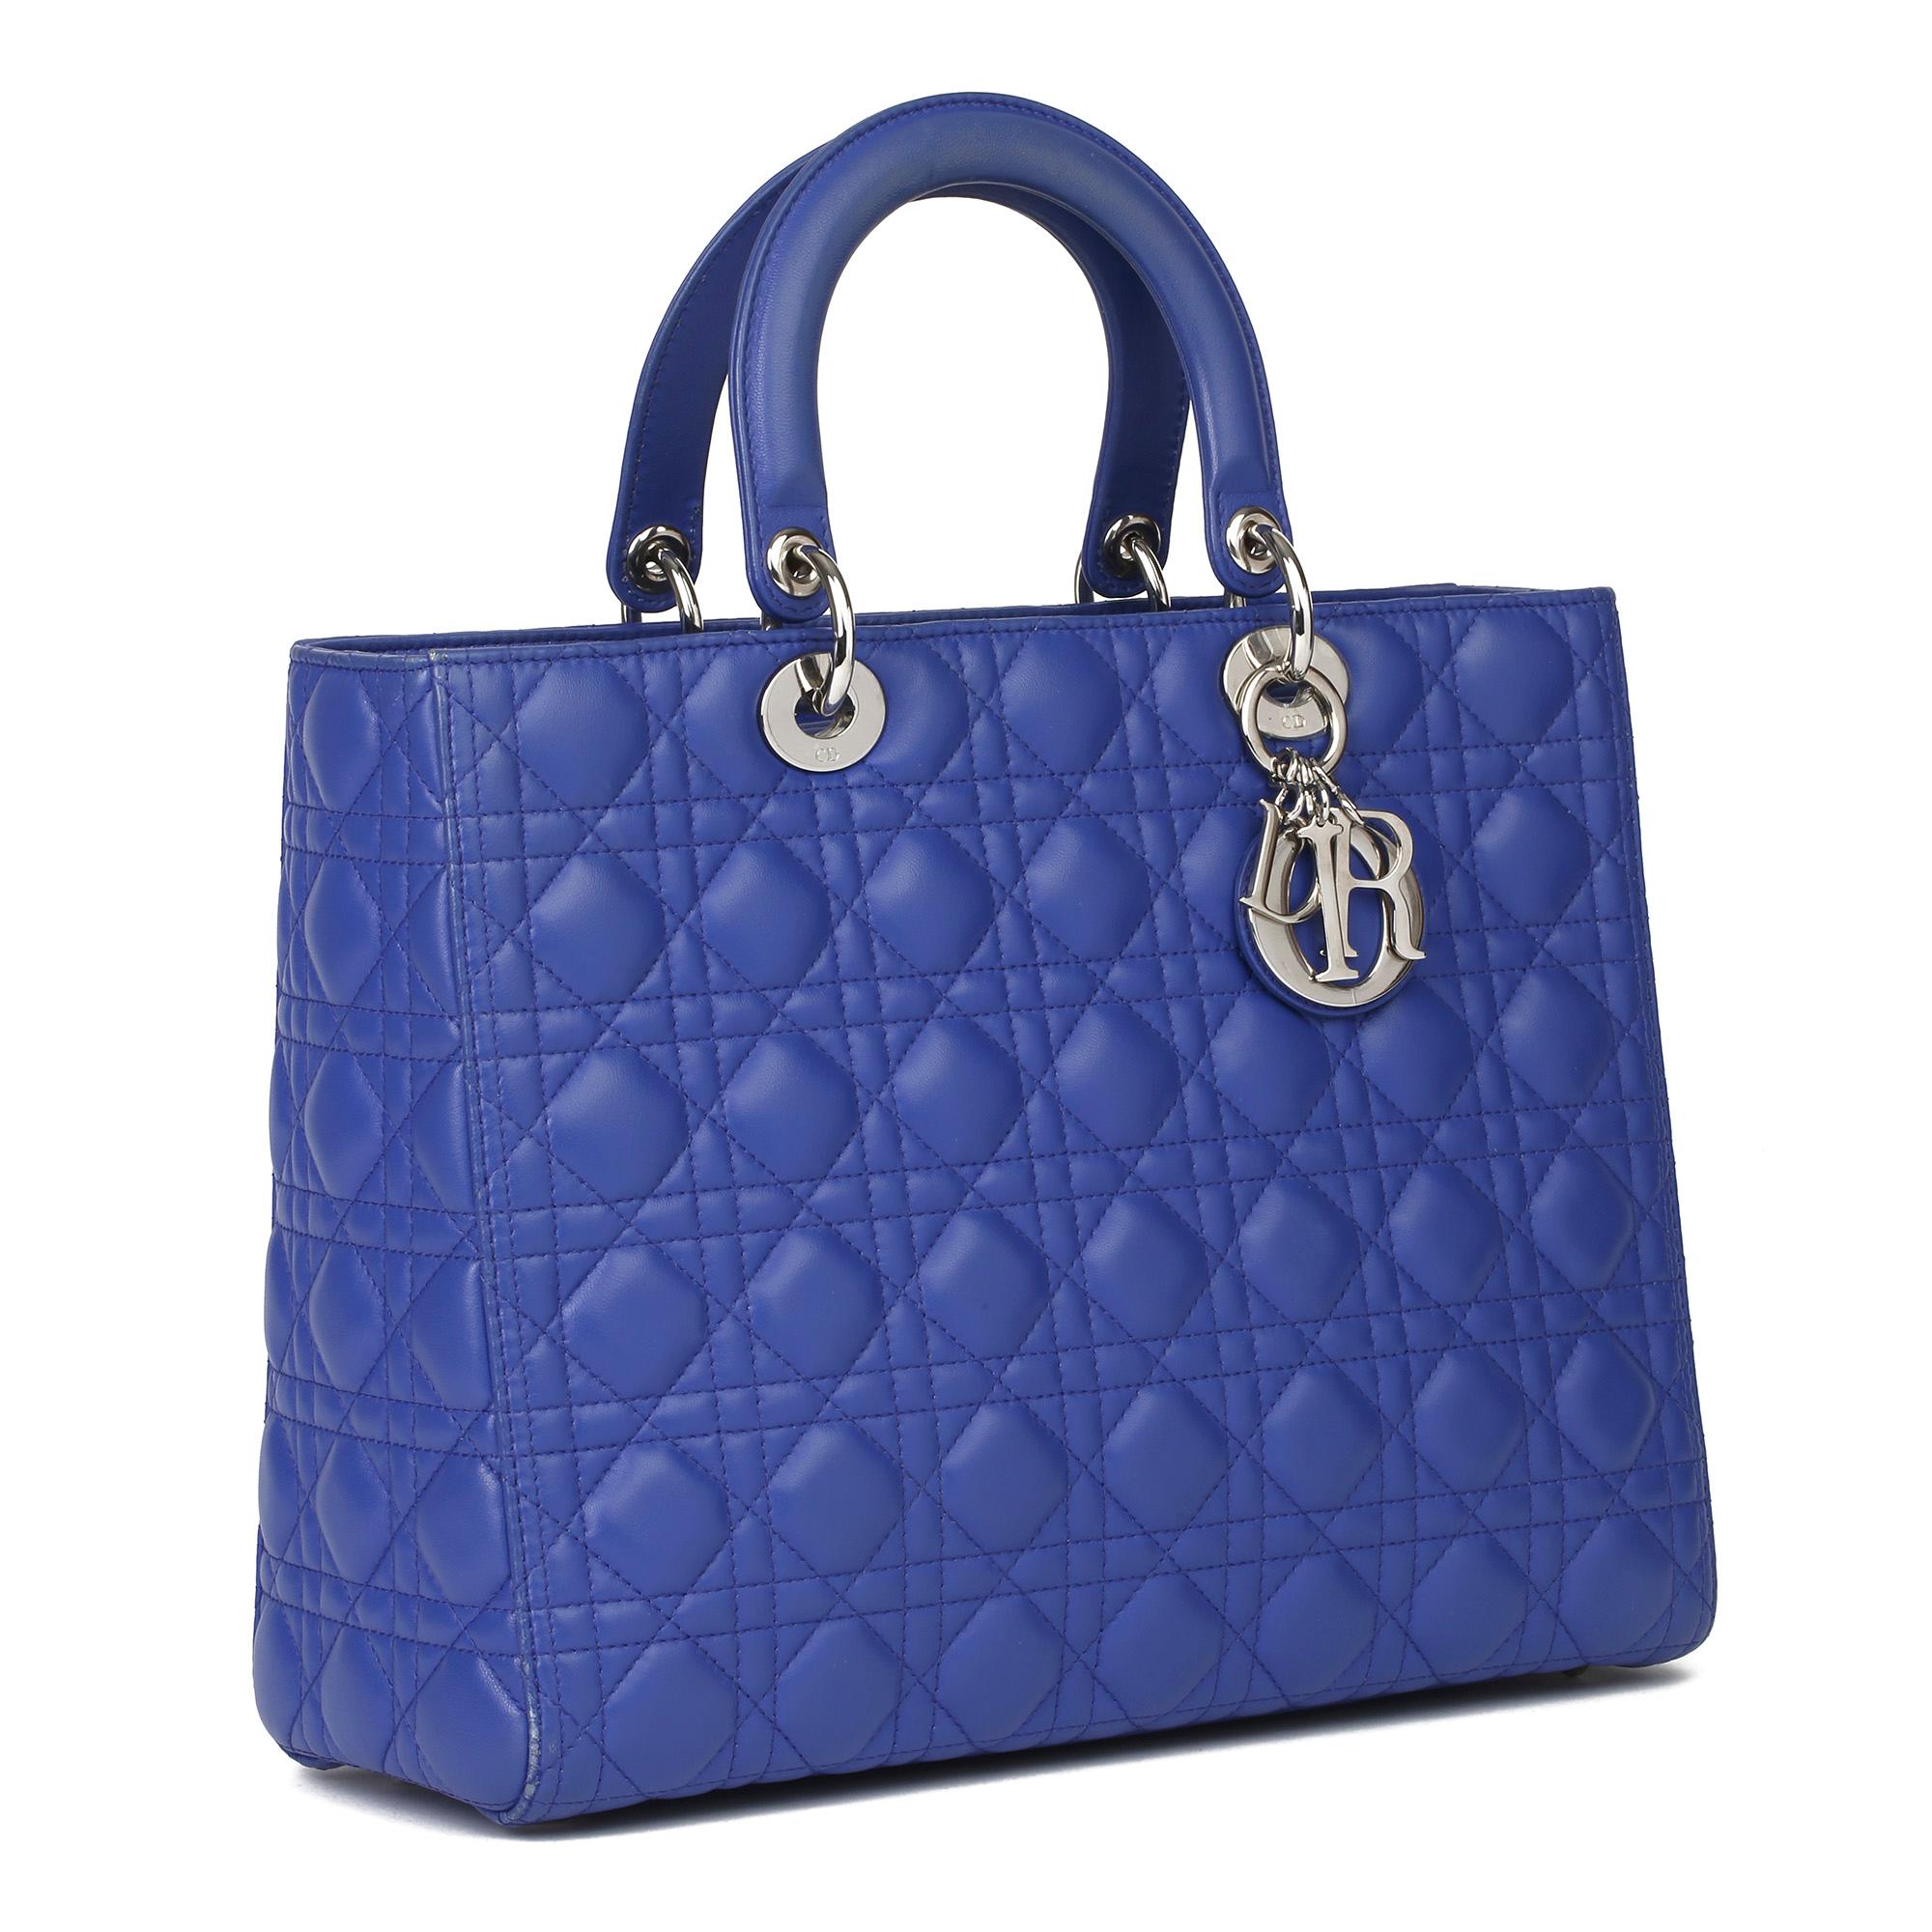 CHRISTIAN DIOR
Purple Quilted Lambskin Leather Lady Dior GM

Xupes Reference: CB335
Serial Number: 05-MA-0113
Age (Circa): 2013
Accompanied By: Authenticity Card, Care Booklet, Shoulder Strap 
Authenticity Details: Date Stamp (Made in Italy)
Gender: